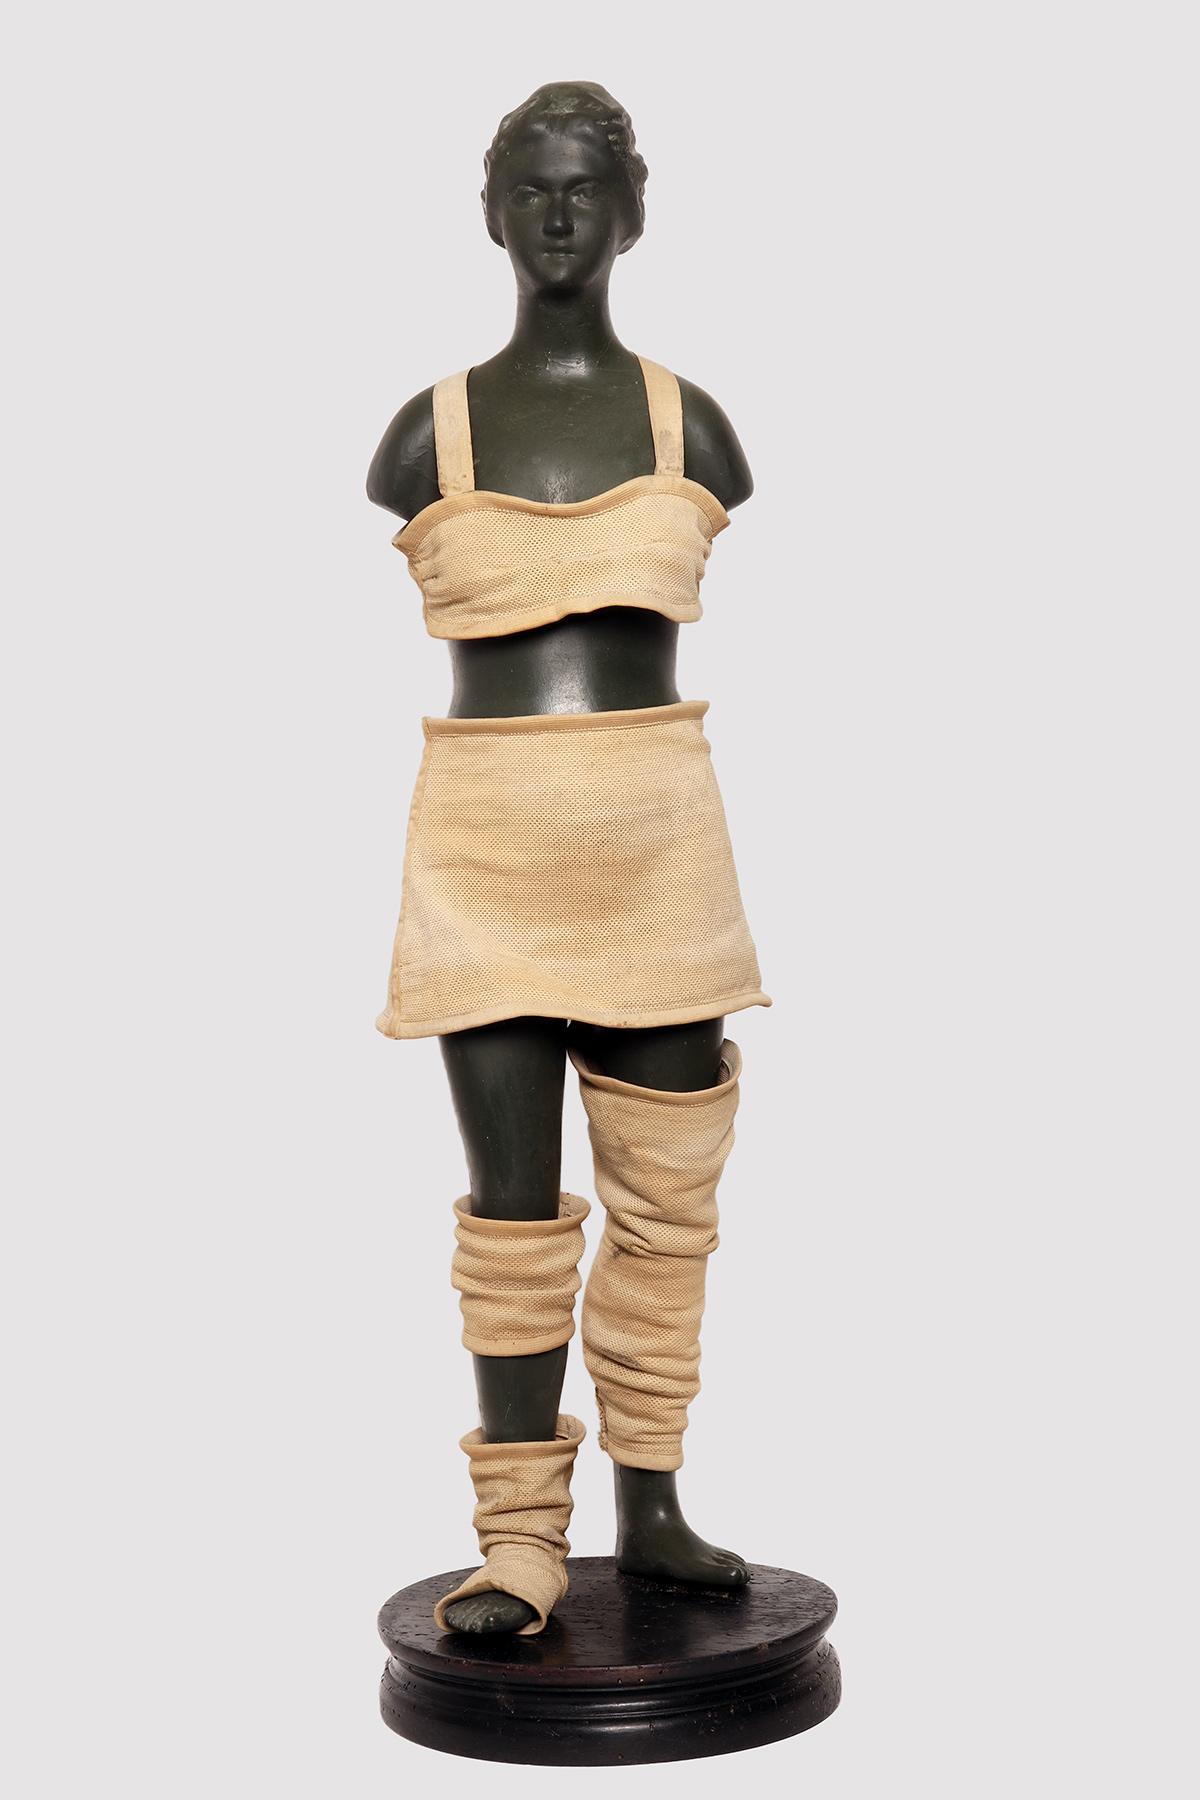 Advertising mannequin for elastic and containment belts. The base is made of wood. The mannequin is made of uniform black buffered papier-mâché. The mannequin is intended to demonstrate the use of orthopedic aids by advertising it. It shows various